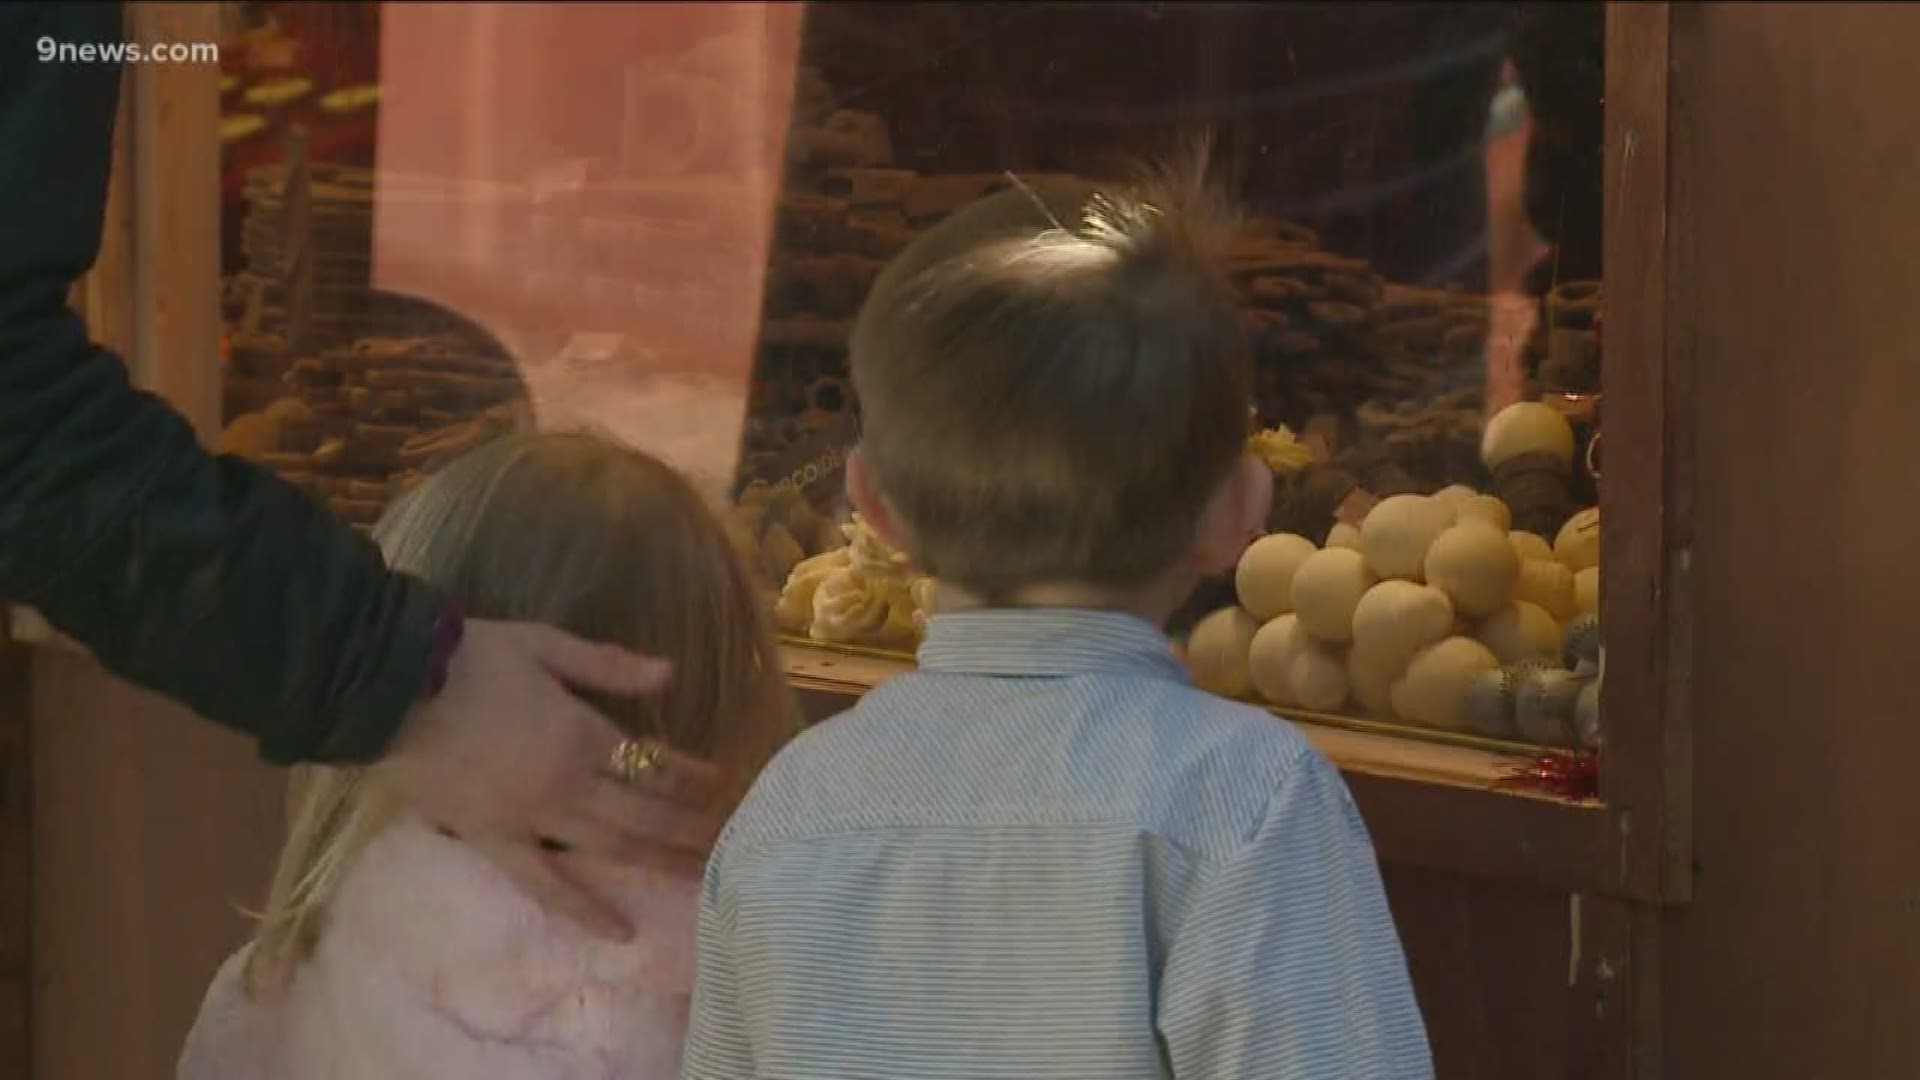 9NEWS' Kylie Bearse stops by the Christkindl Market to see what it has to offer.